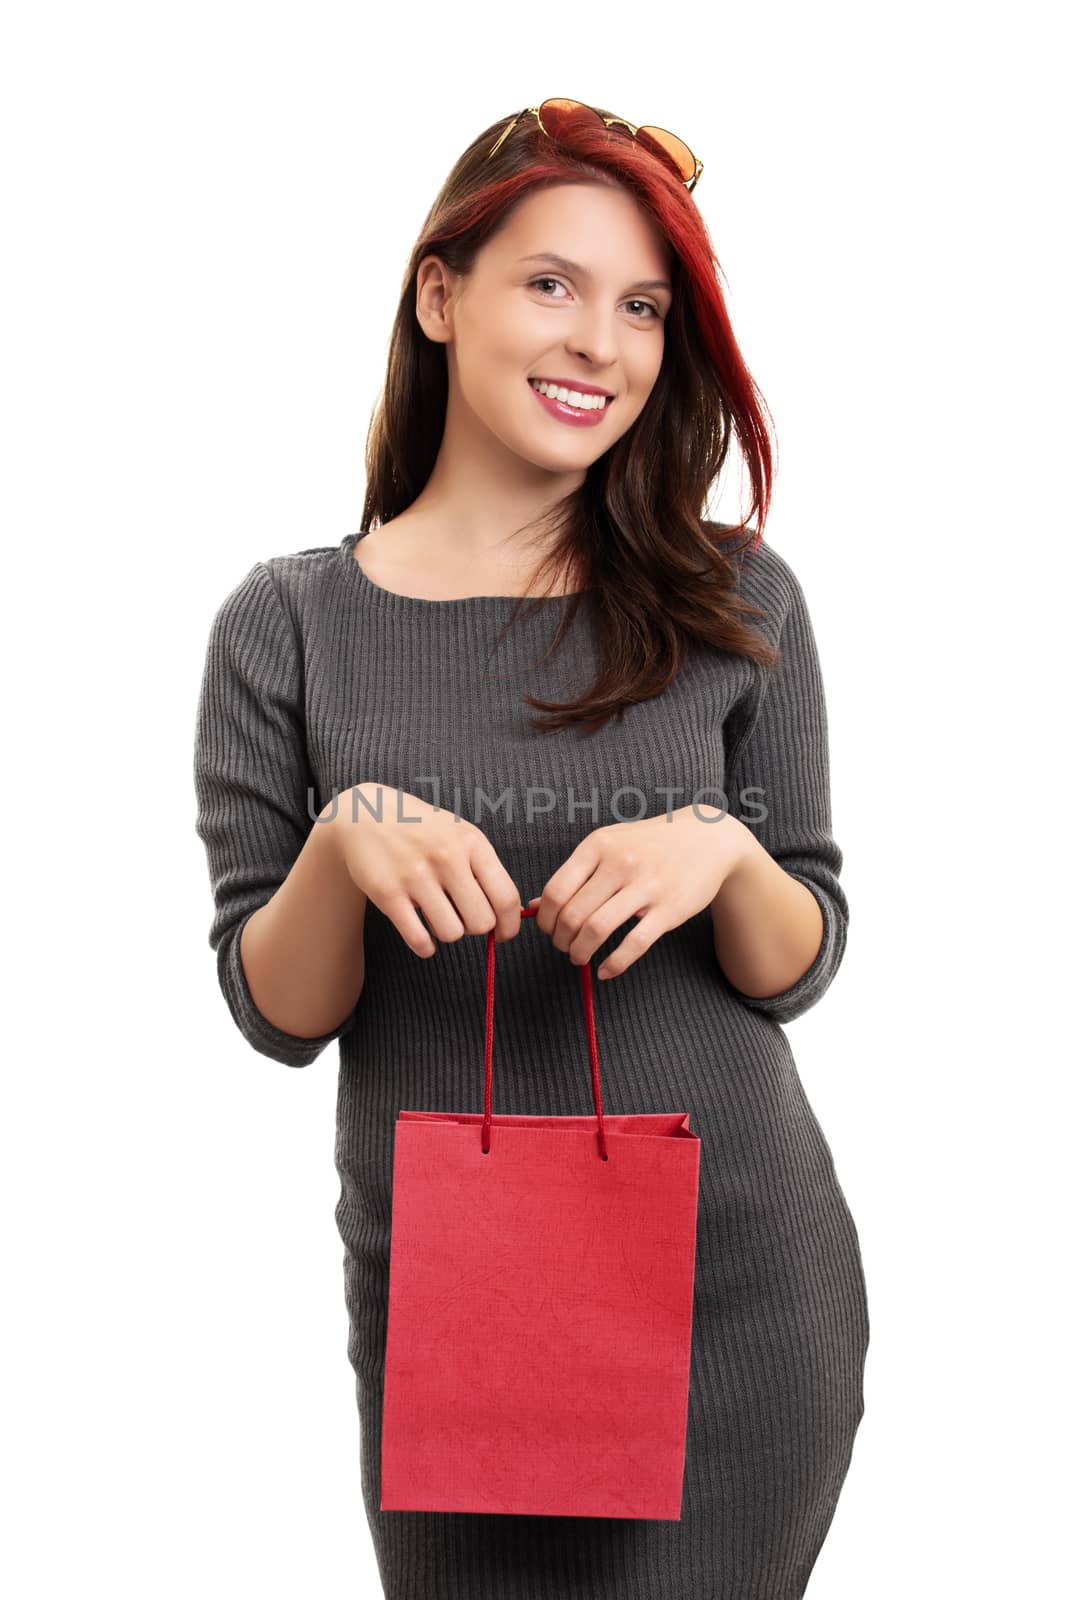 Smiling young girl with a shopping bag by Mendelex